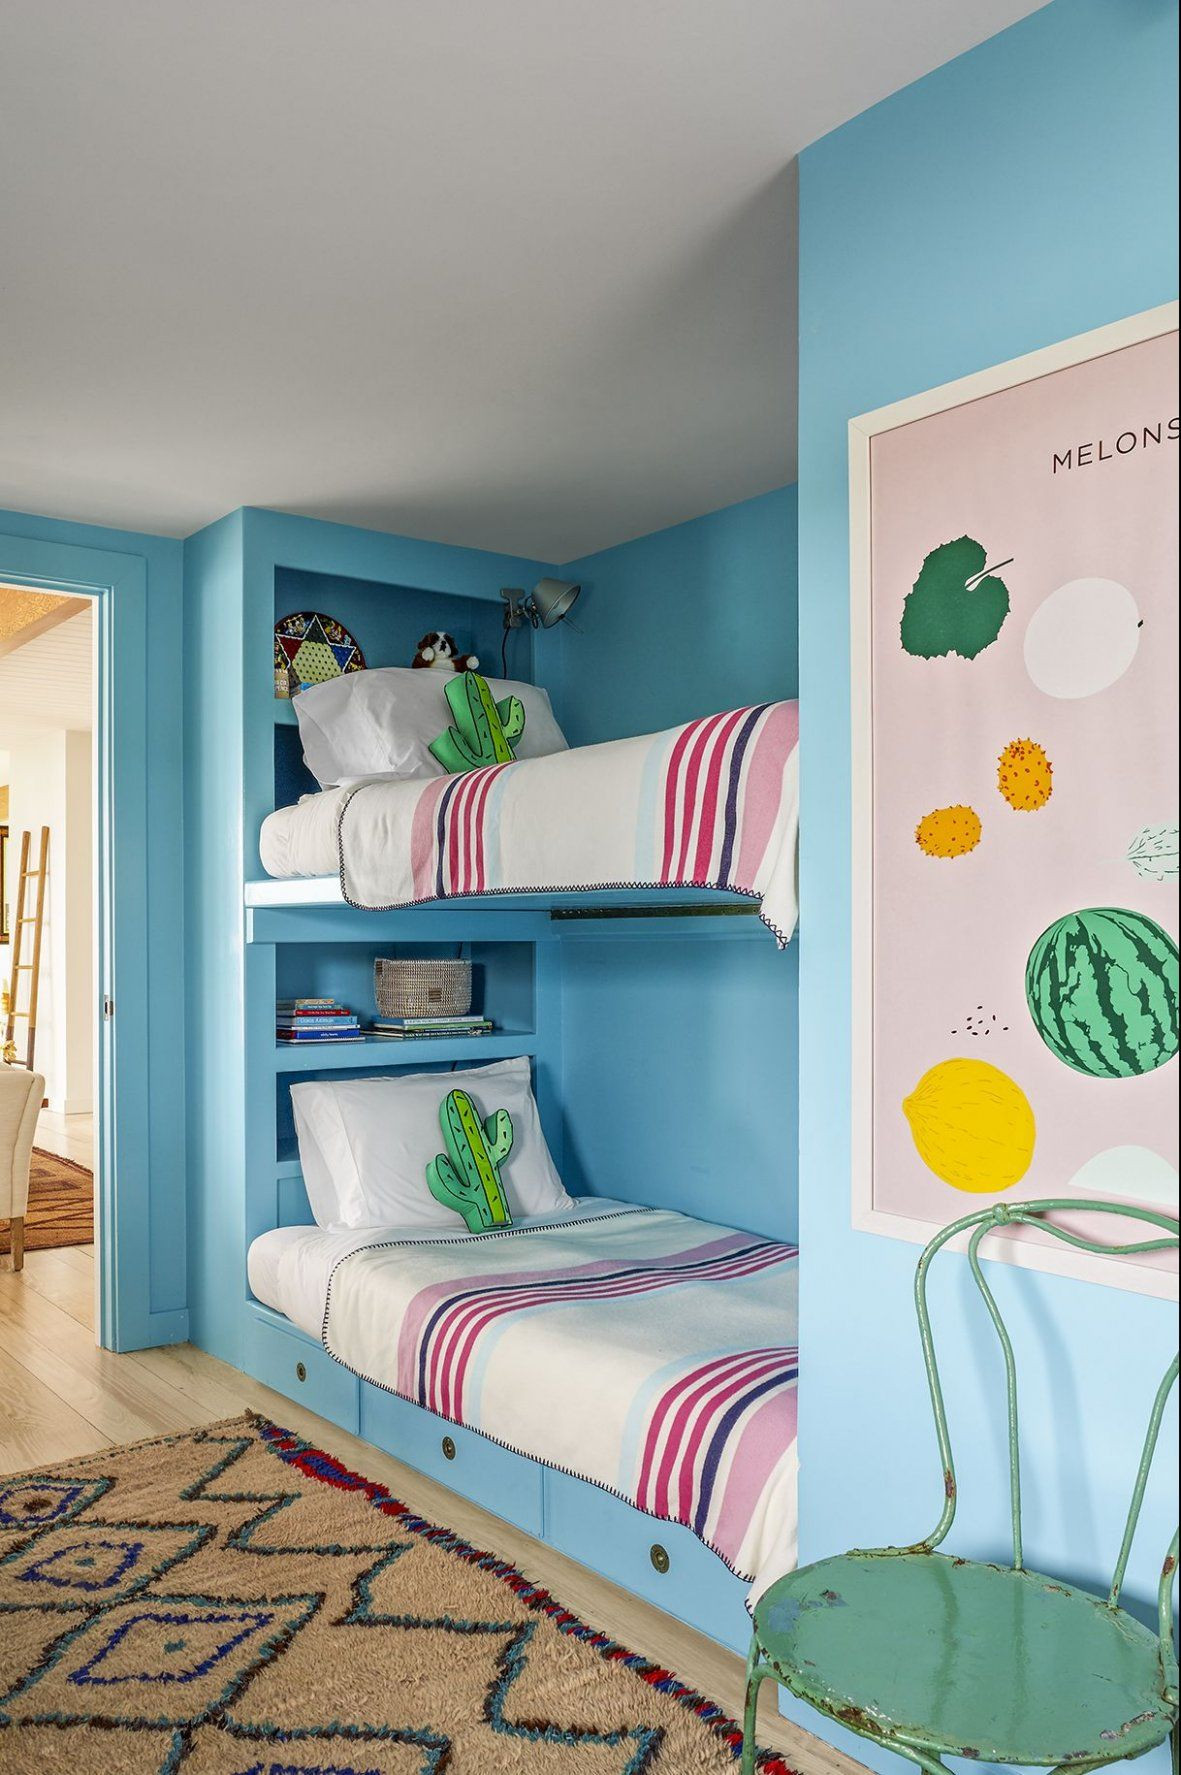 Cool Kids Bedroom Theme Ideas
 This Is Why Cool kids bedroom theme ideas Is So Famous in